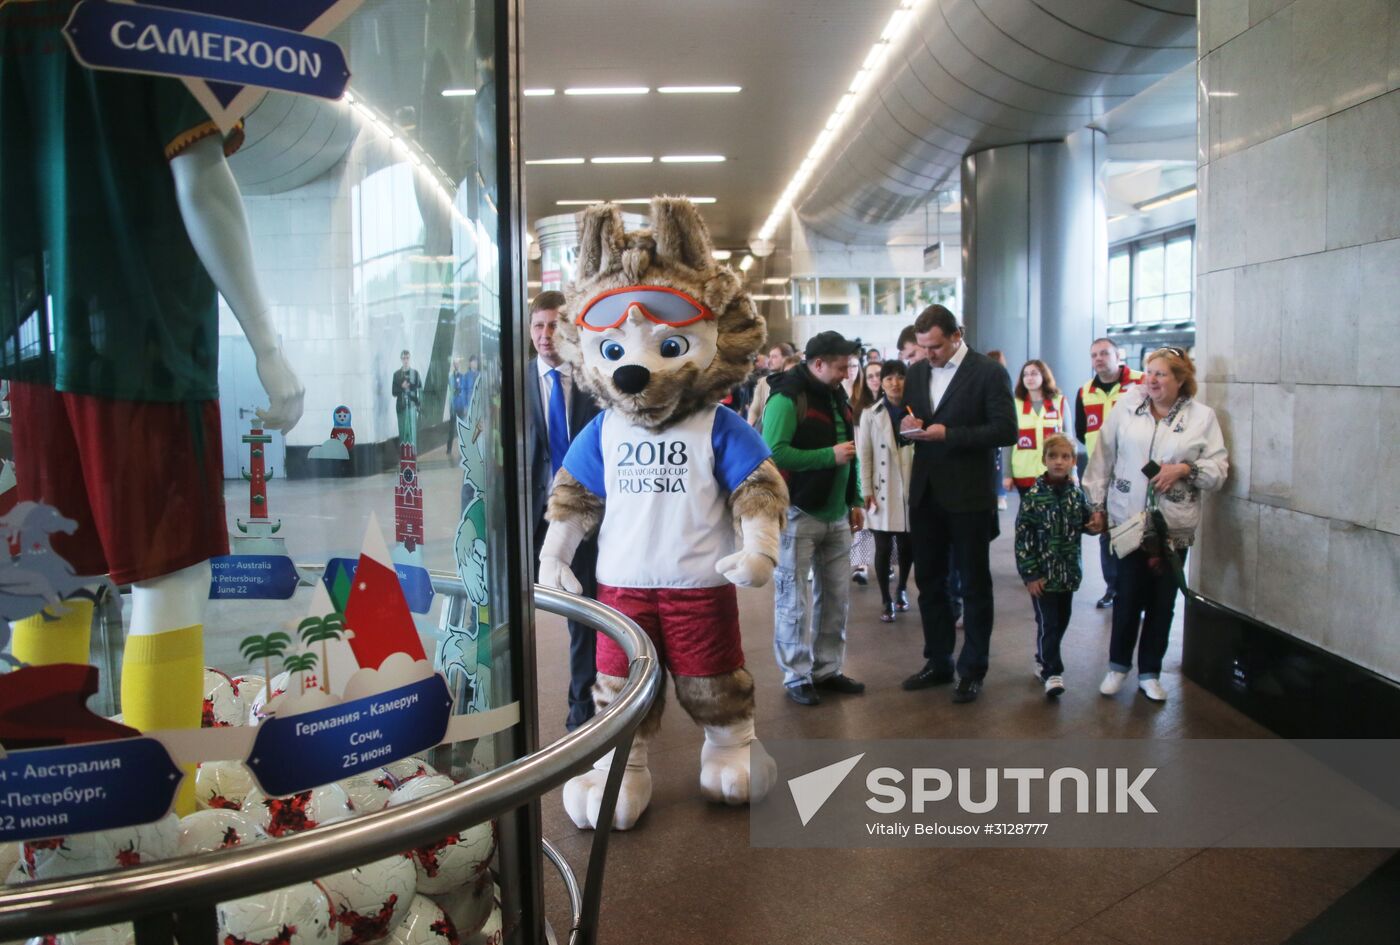 Moscow metro unveils exhibition marking 2017 FIFA Confederations Cup